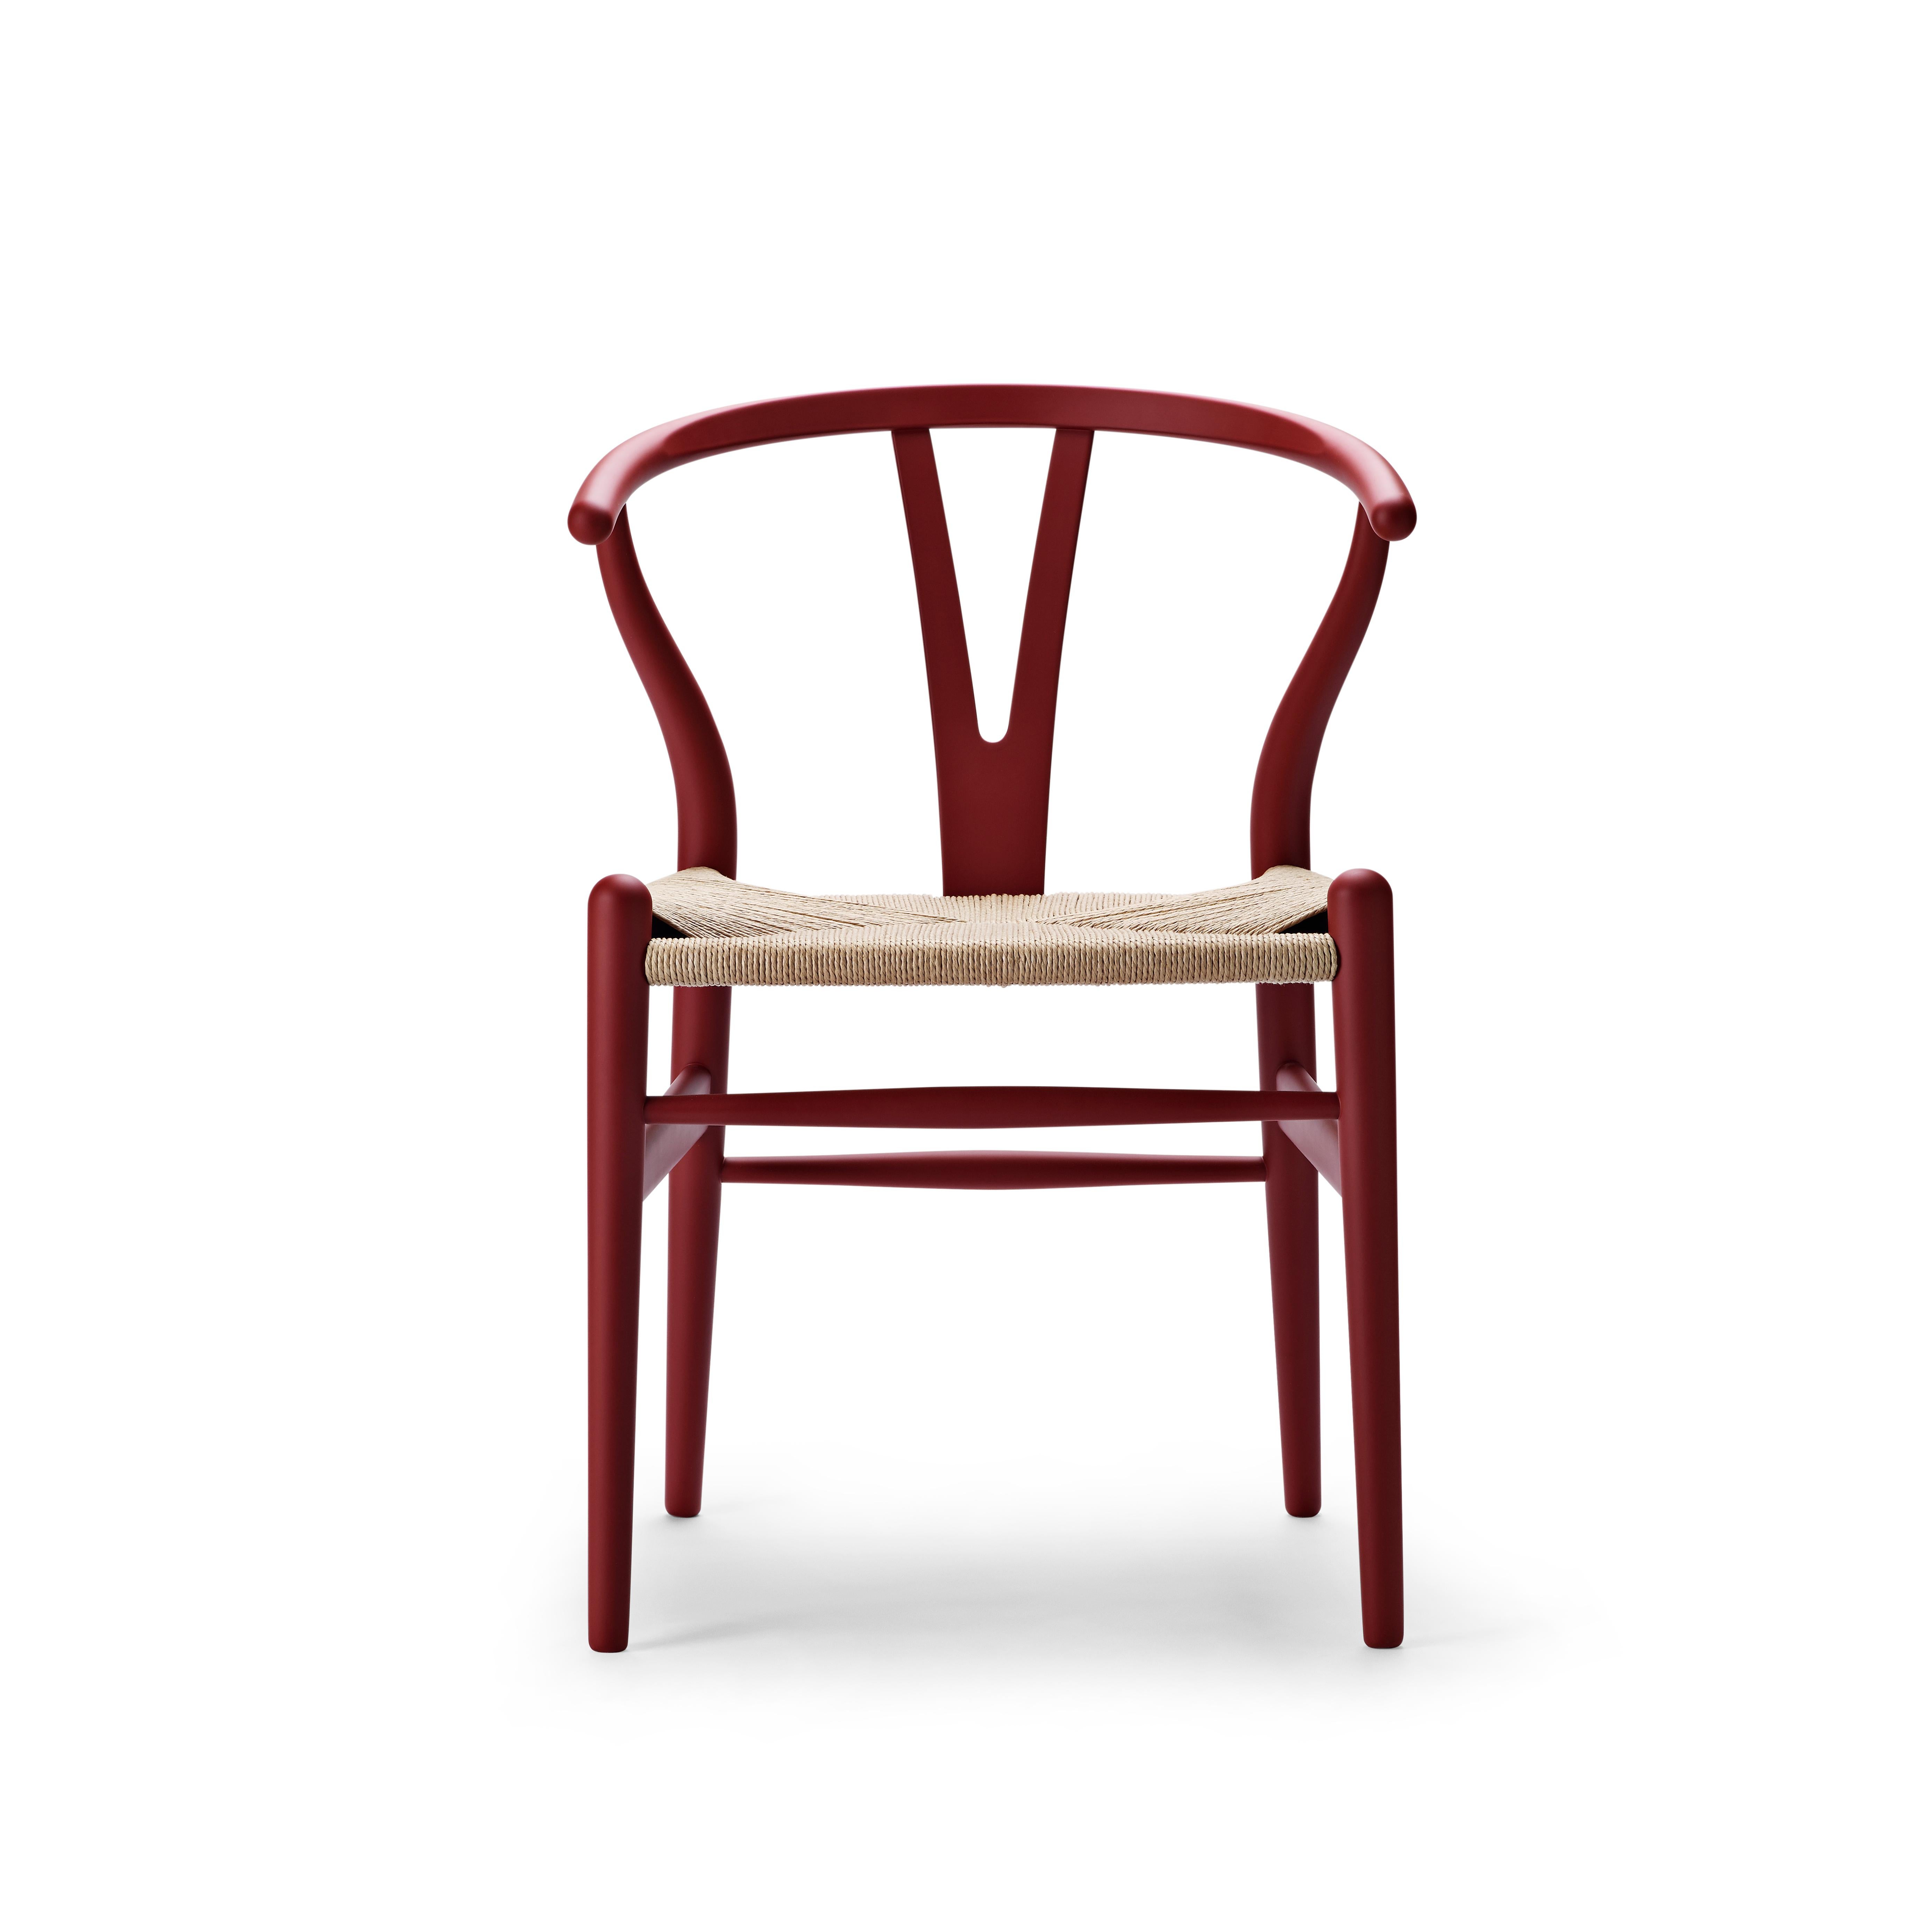 For Sale: Red (Soft Red) CH24 Wishbone Chair in Soft Colors by Hans J. Wegner